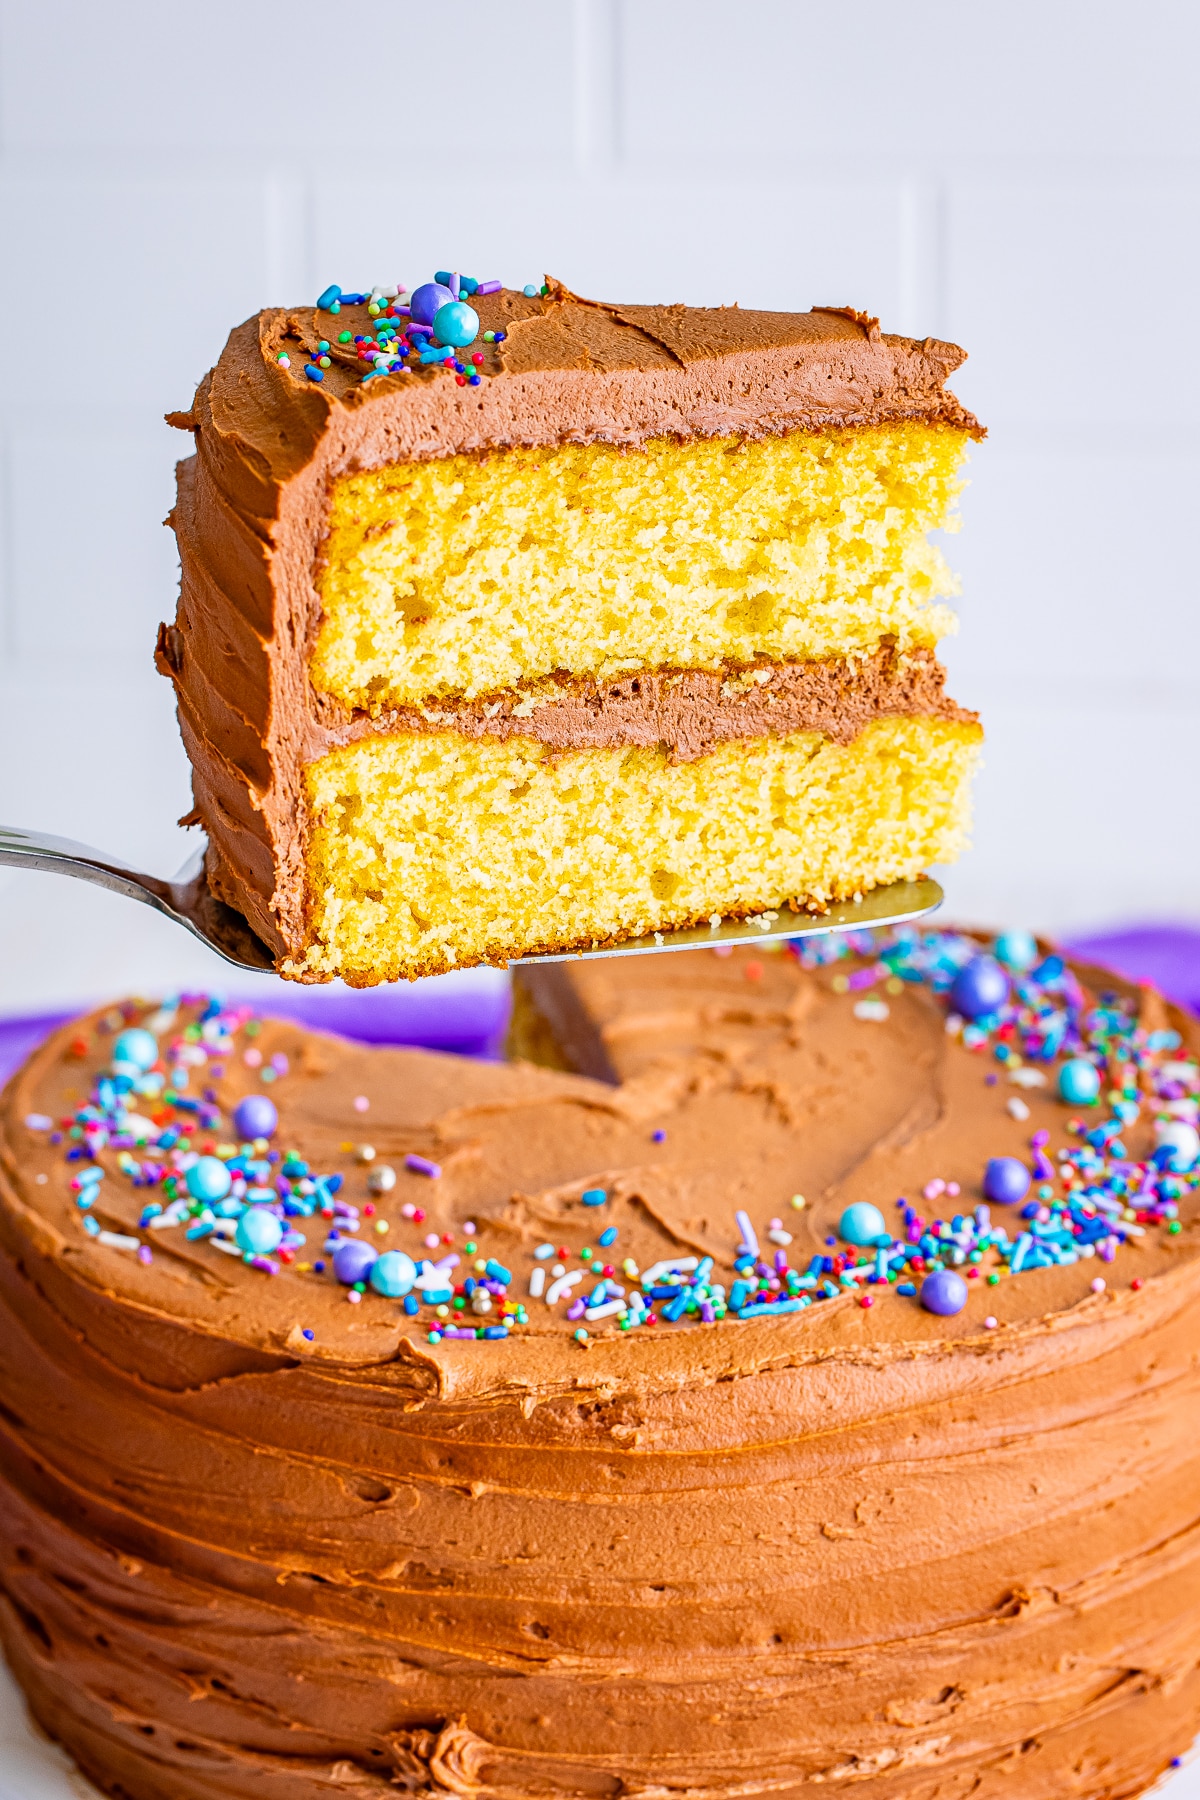 cake server holding up a slice of yellow cake with chocolate frosting in air